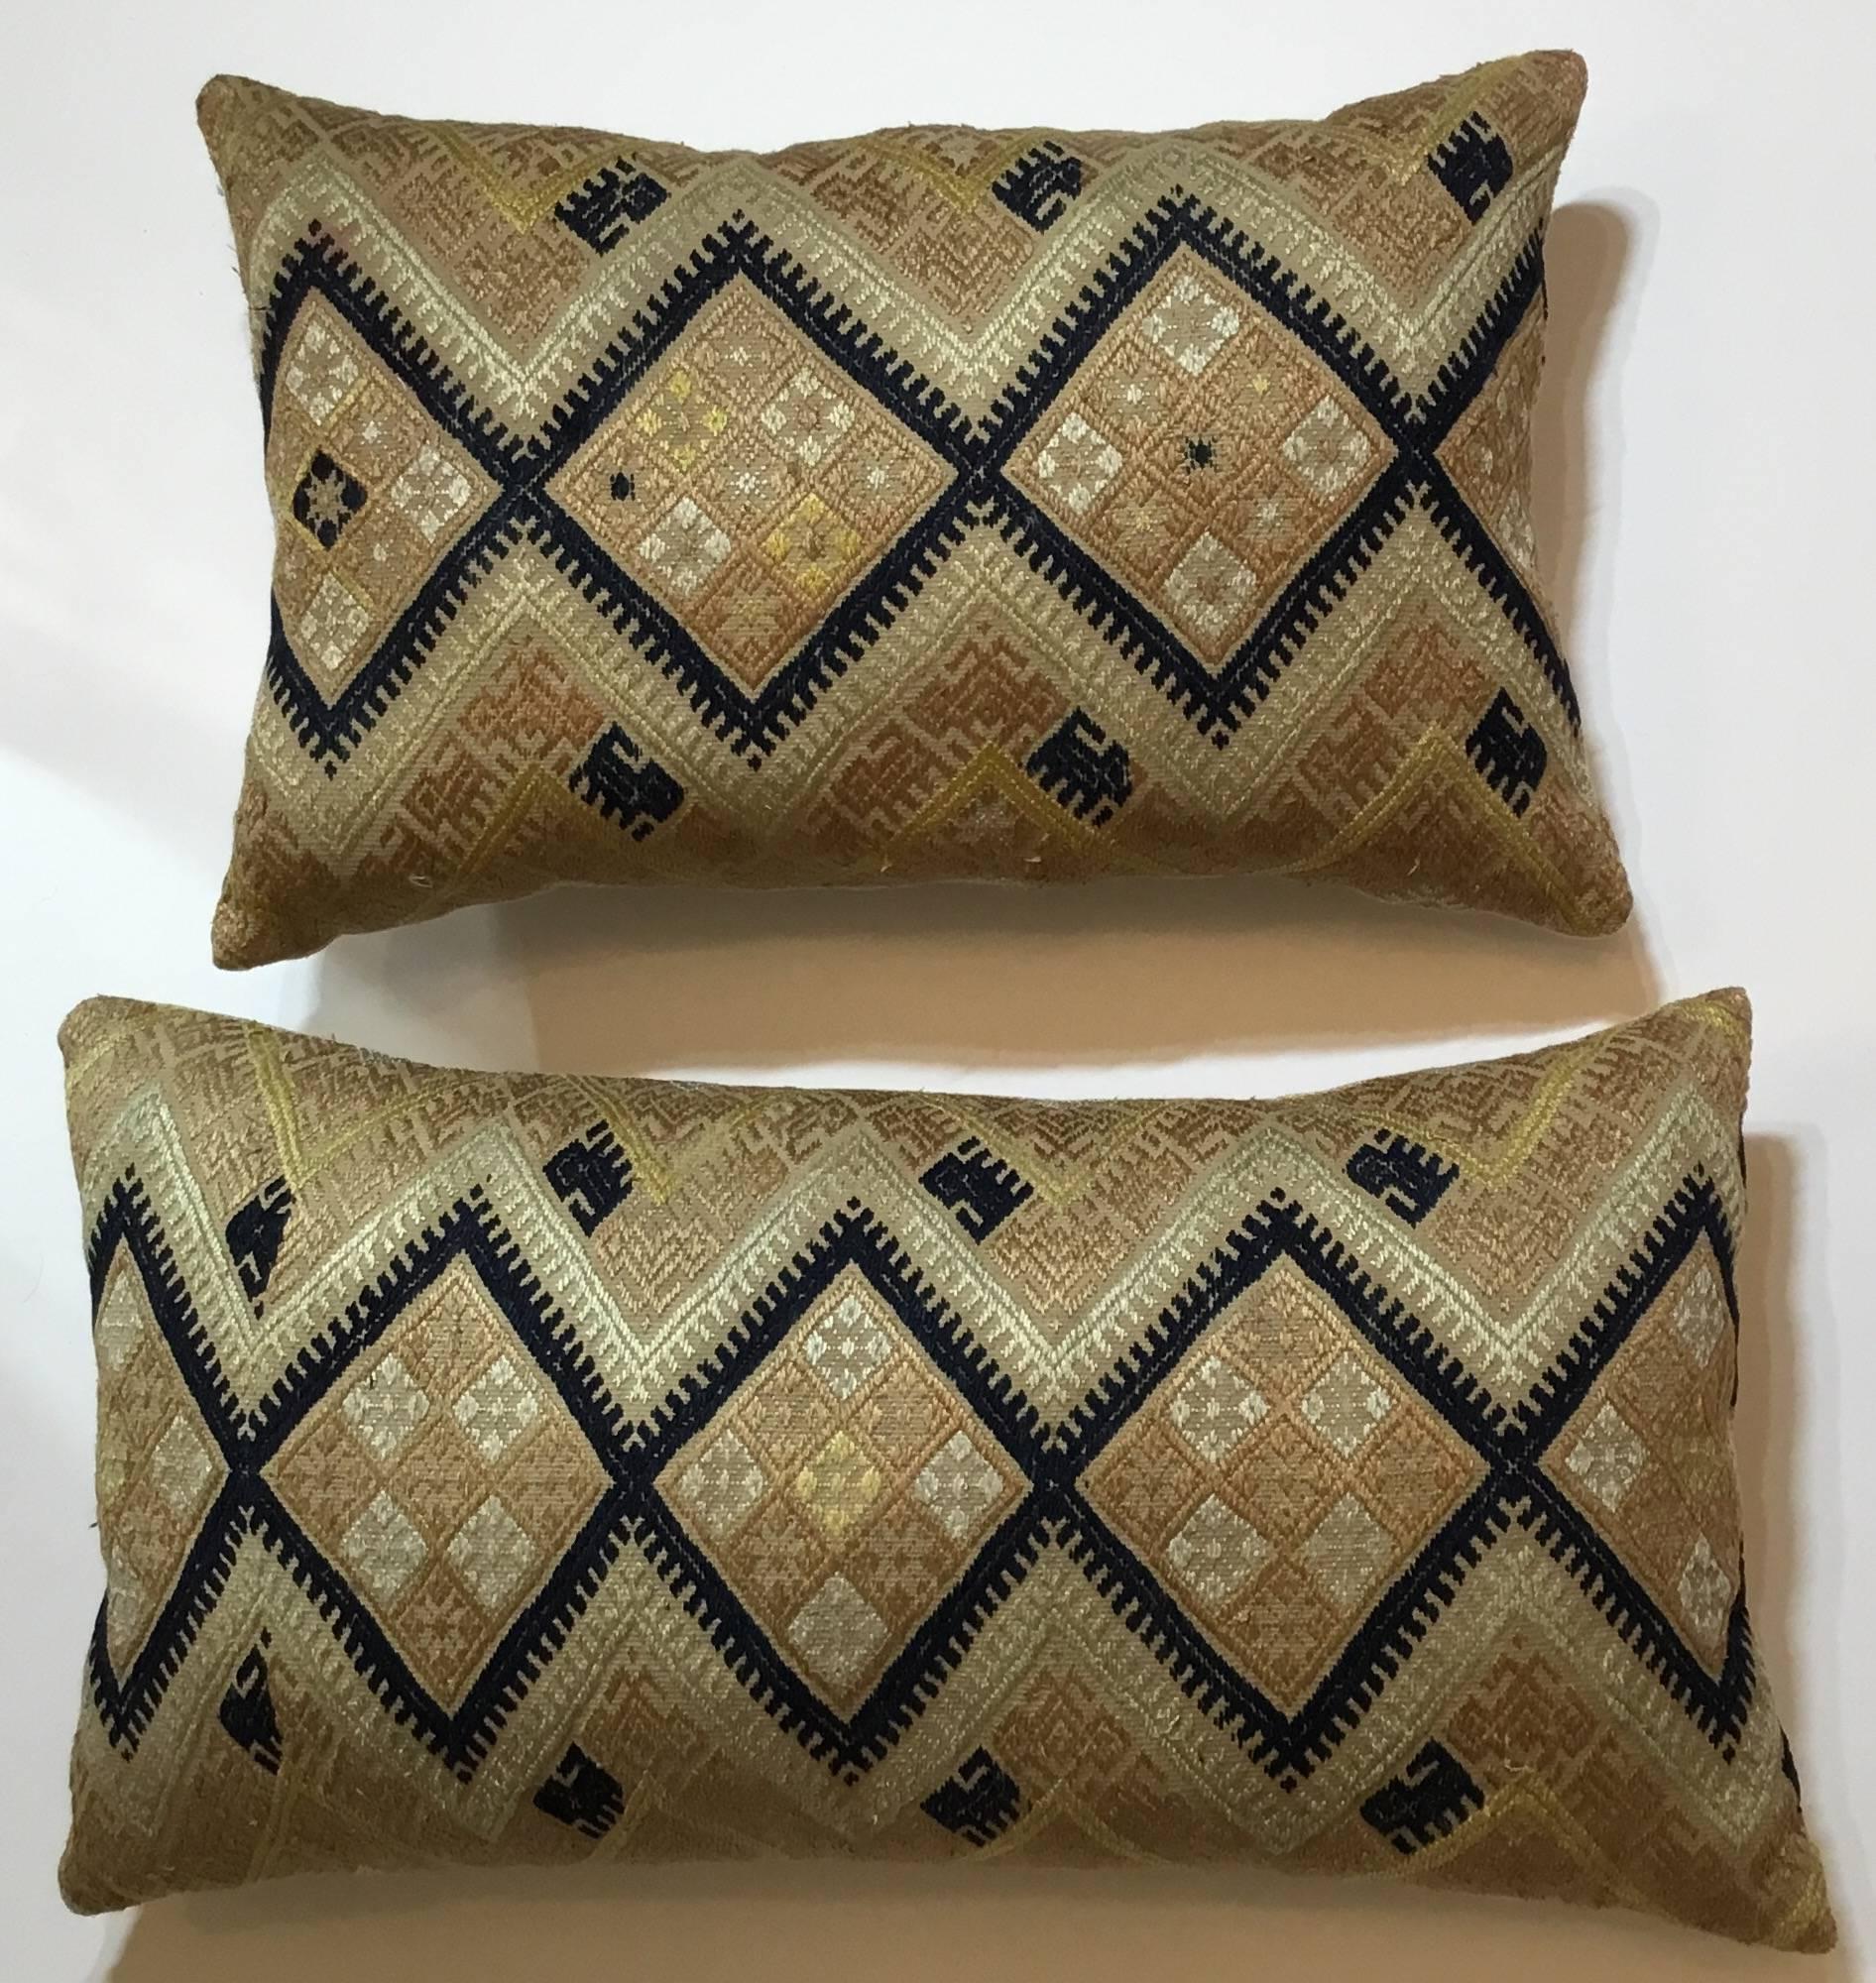 Beautiful pair of pillows made of hand embroidery silk on cotton cream color background. Primitive geometric and lions motifs.
Linen backing, fresh inserts.
Sizes:
5